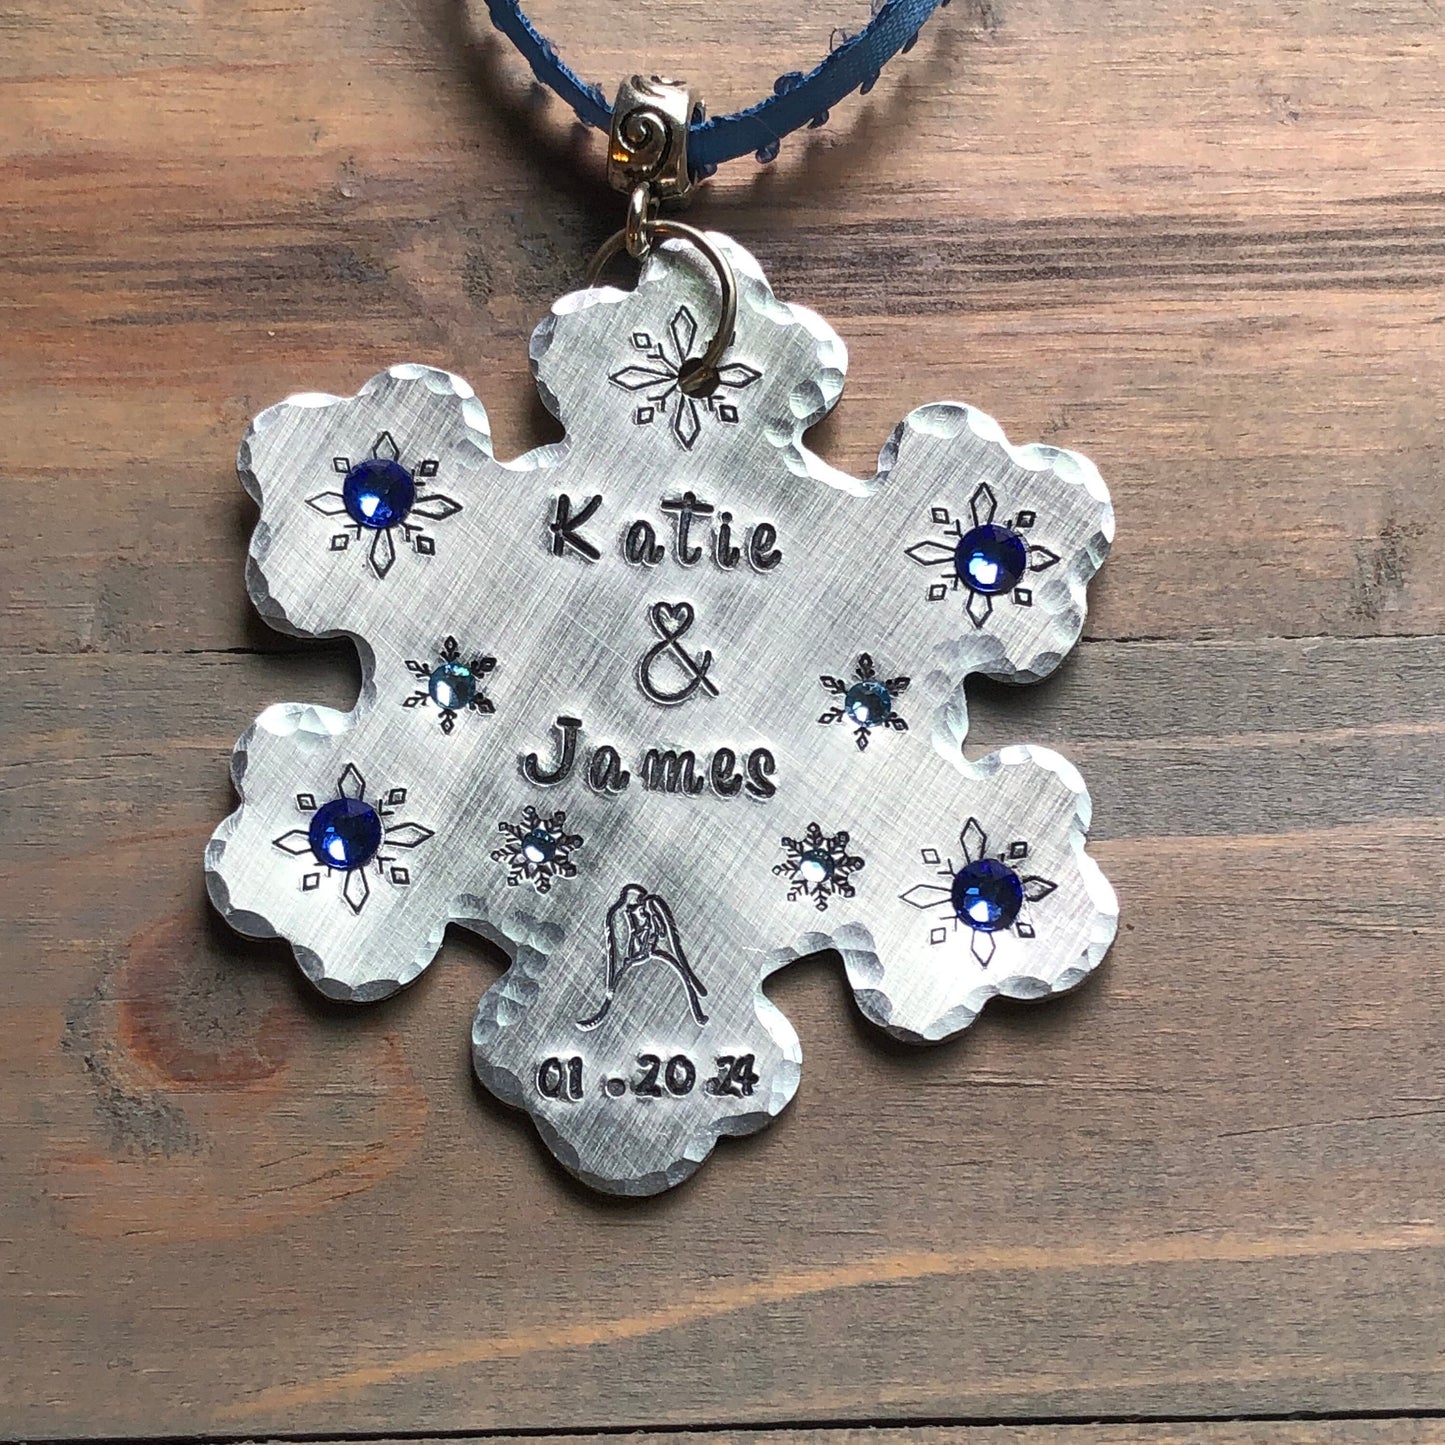 Something Blue for Winter Wedding, Personalized Bridal Bouquet Charm, Snowflake with Blue Crystals, Couple Names & Date, Christmas Ornament